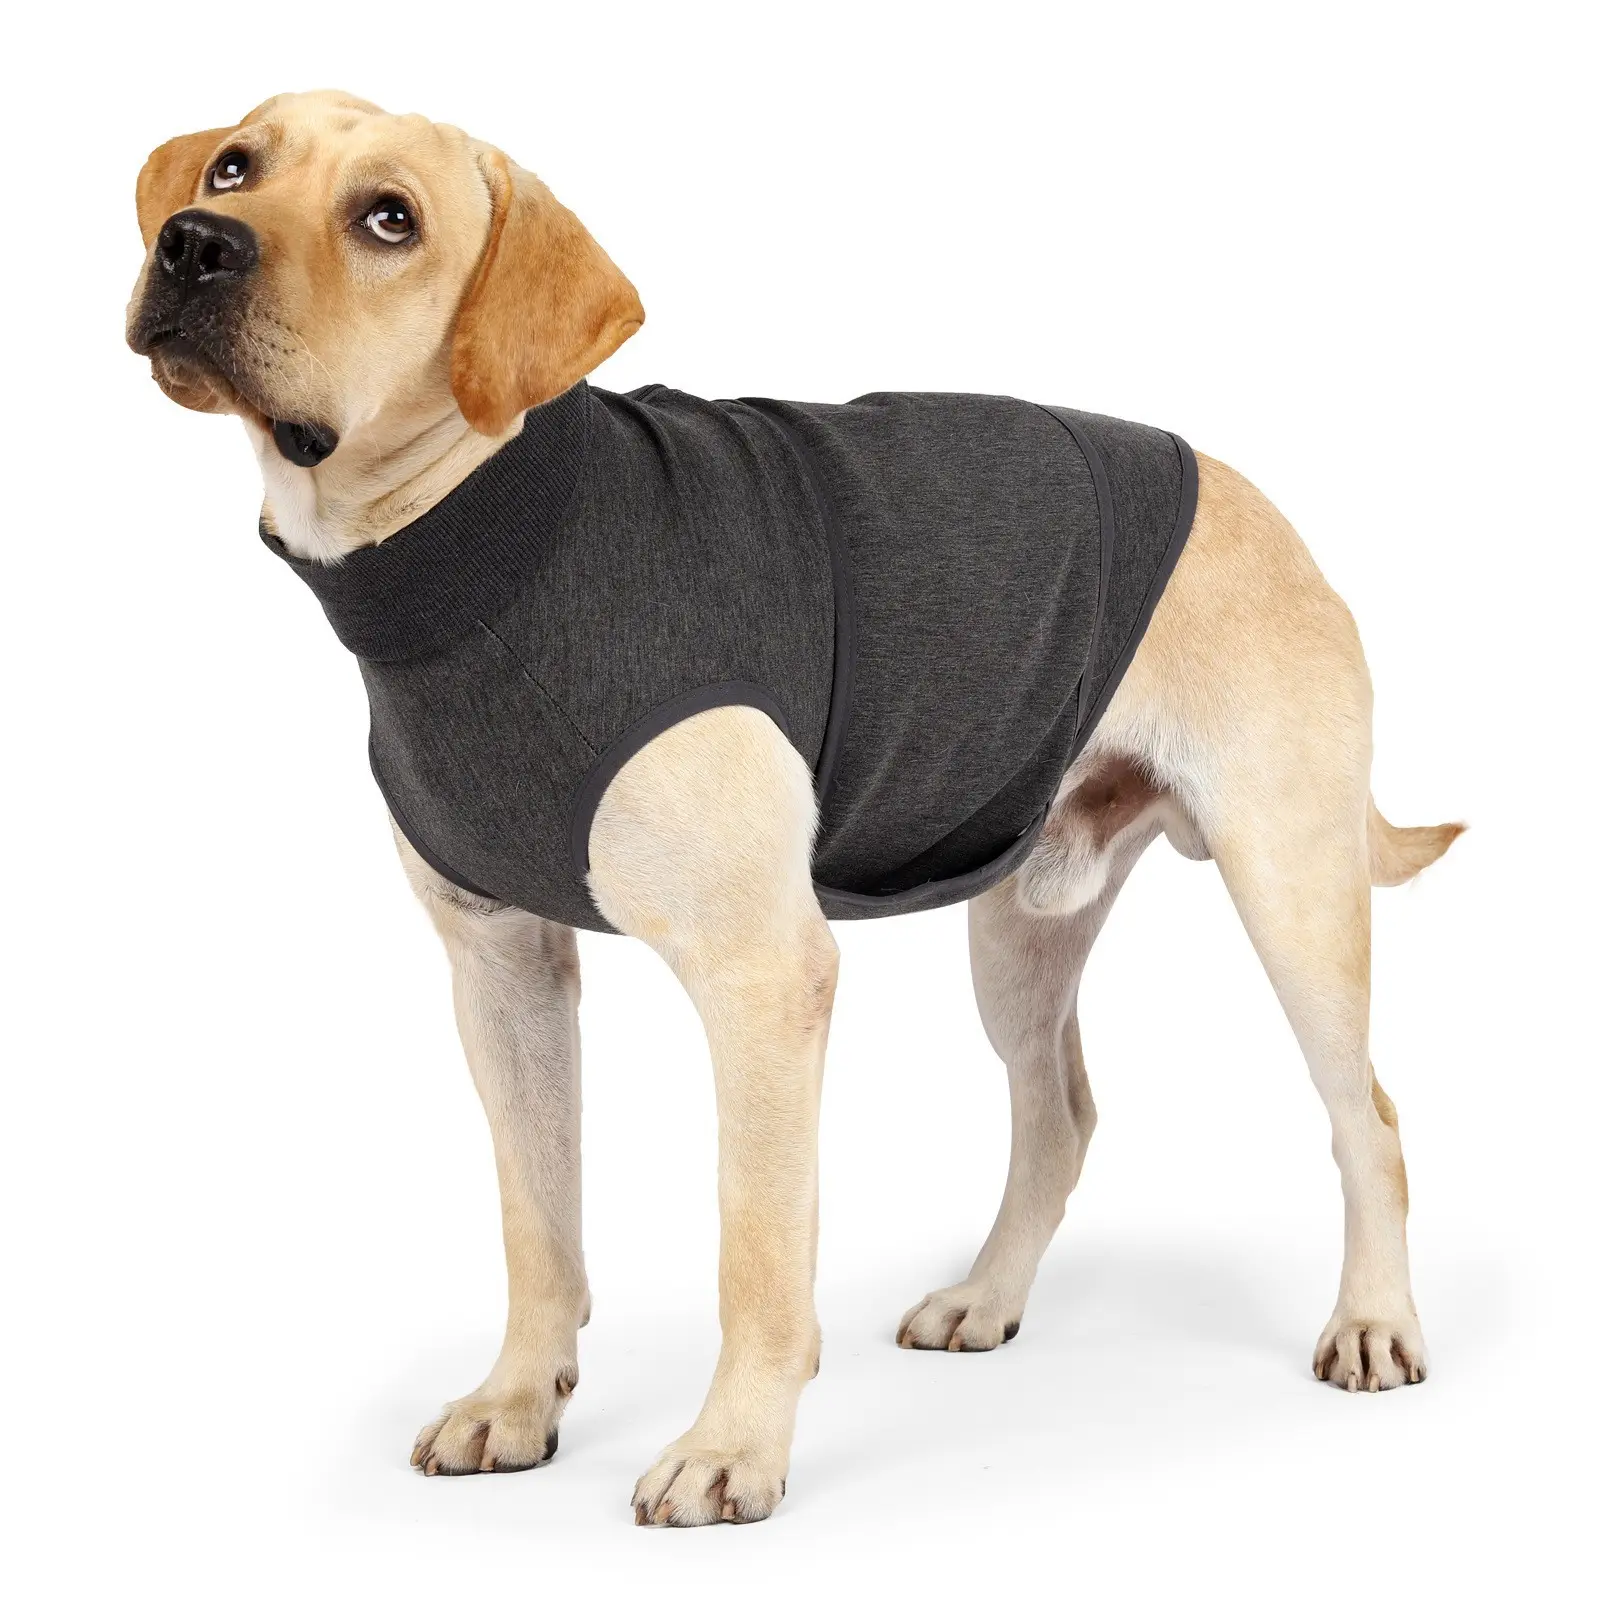 Compression Anxiety Vest For Dogs Thunder Jacket Calming Shirts For Dogs